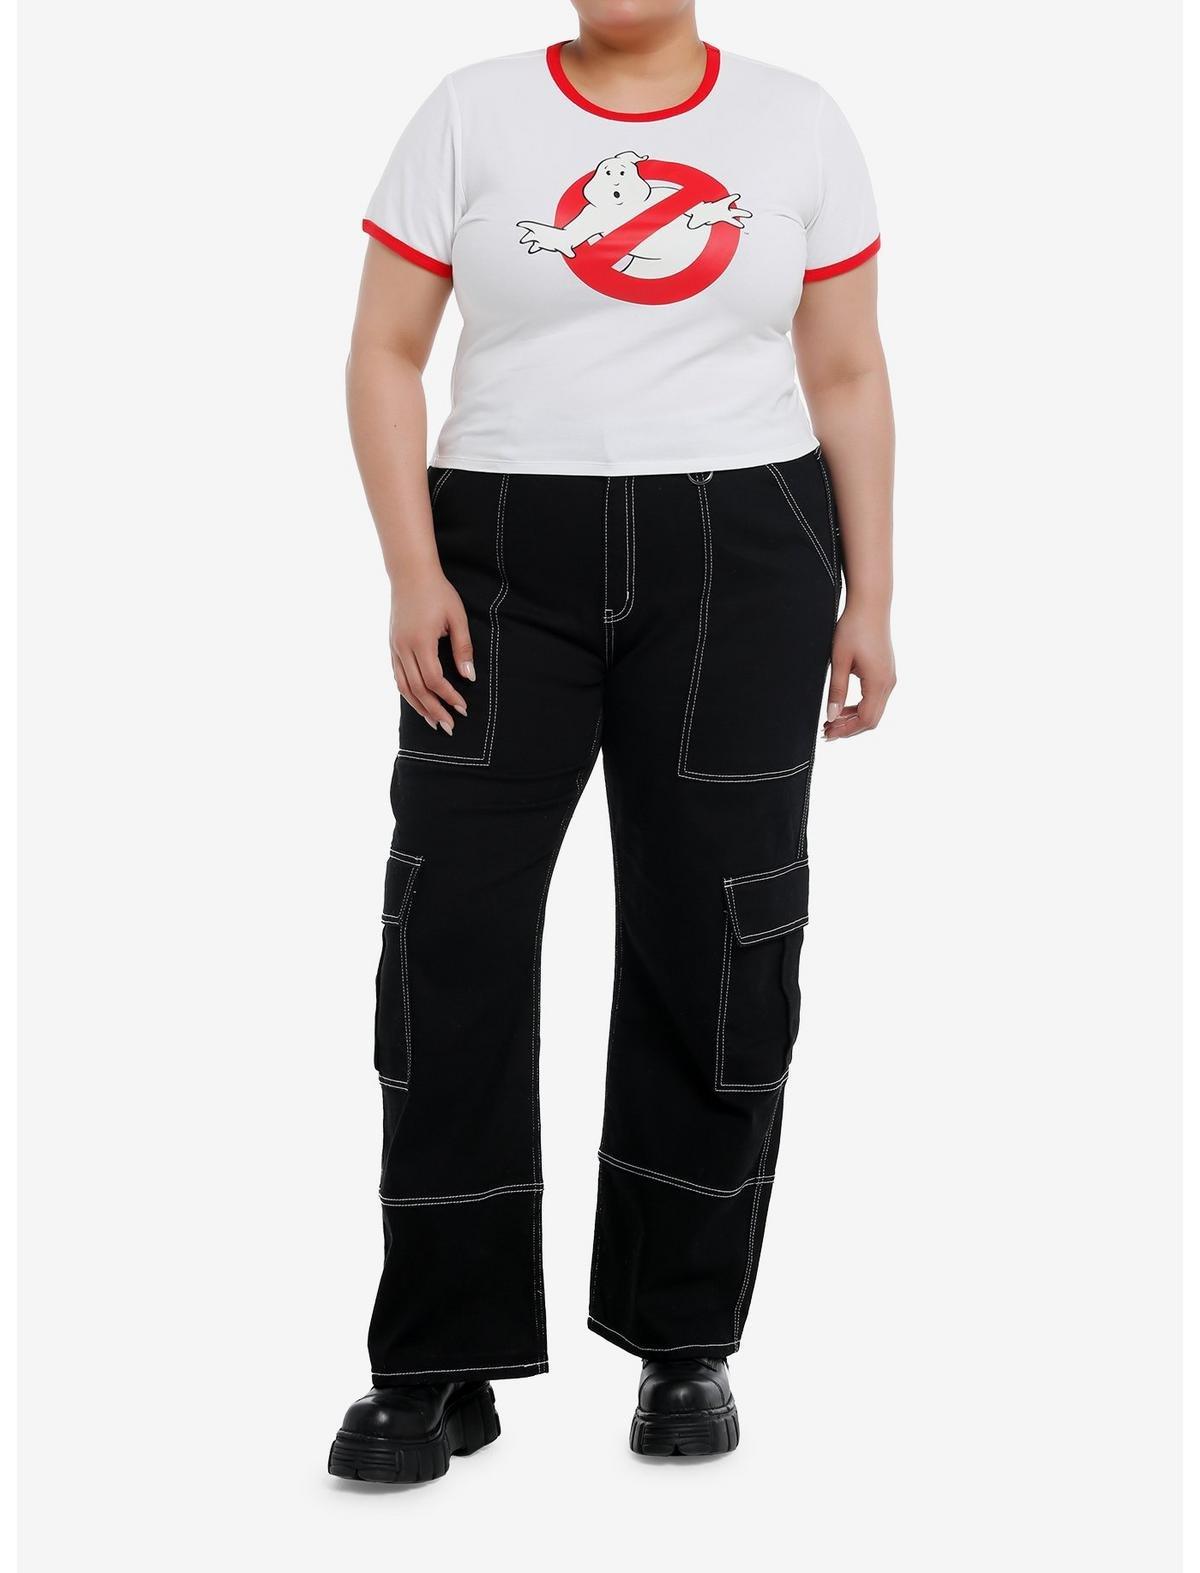 Her Universe Ghostbusters Logo Glow-In-The-Dark Baby Ringer T-Shirt Plus Size, MULTI, alternate